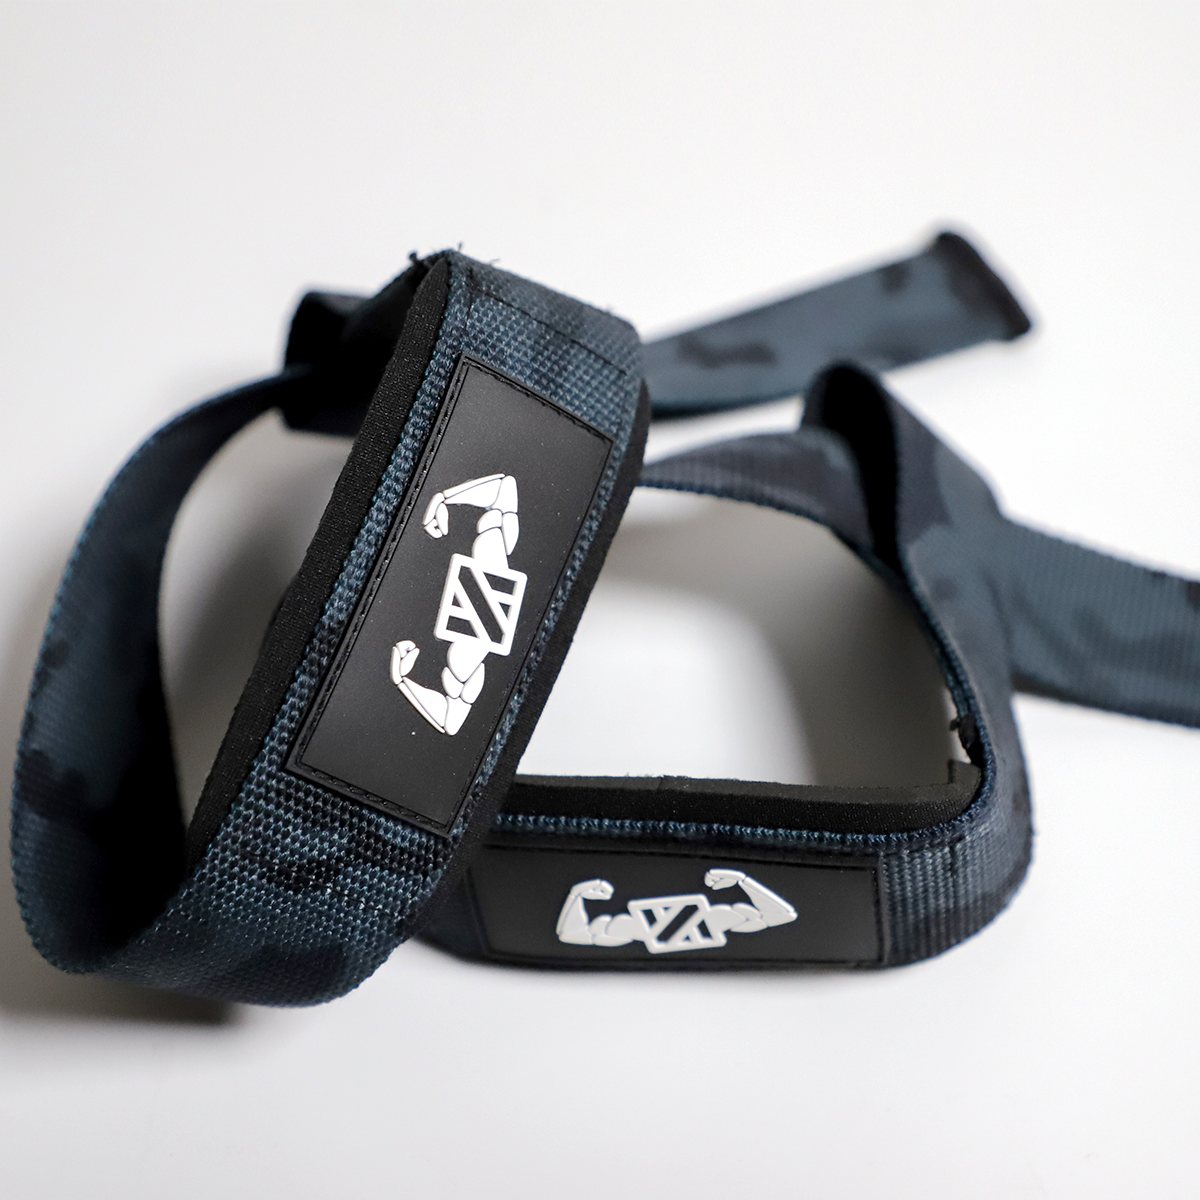 Muscle Crate - Lifting Straps - Dark Camo